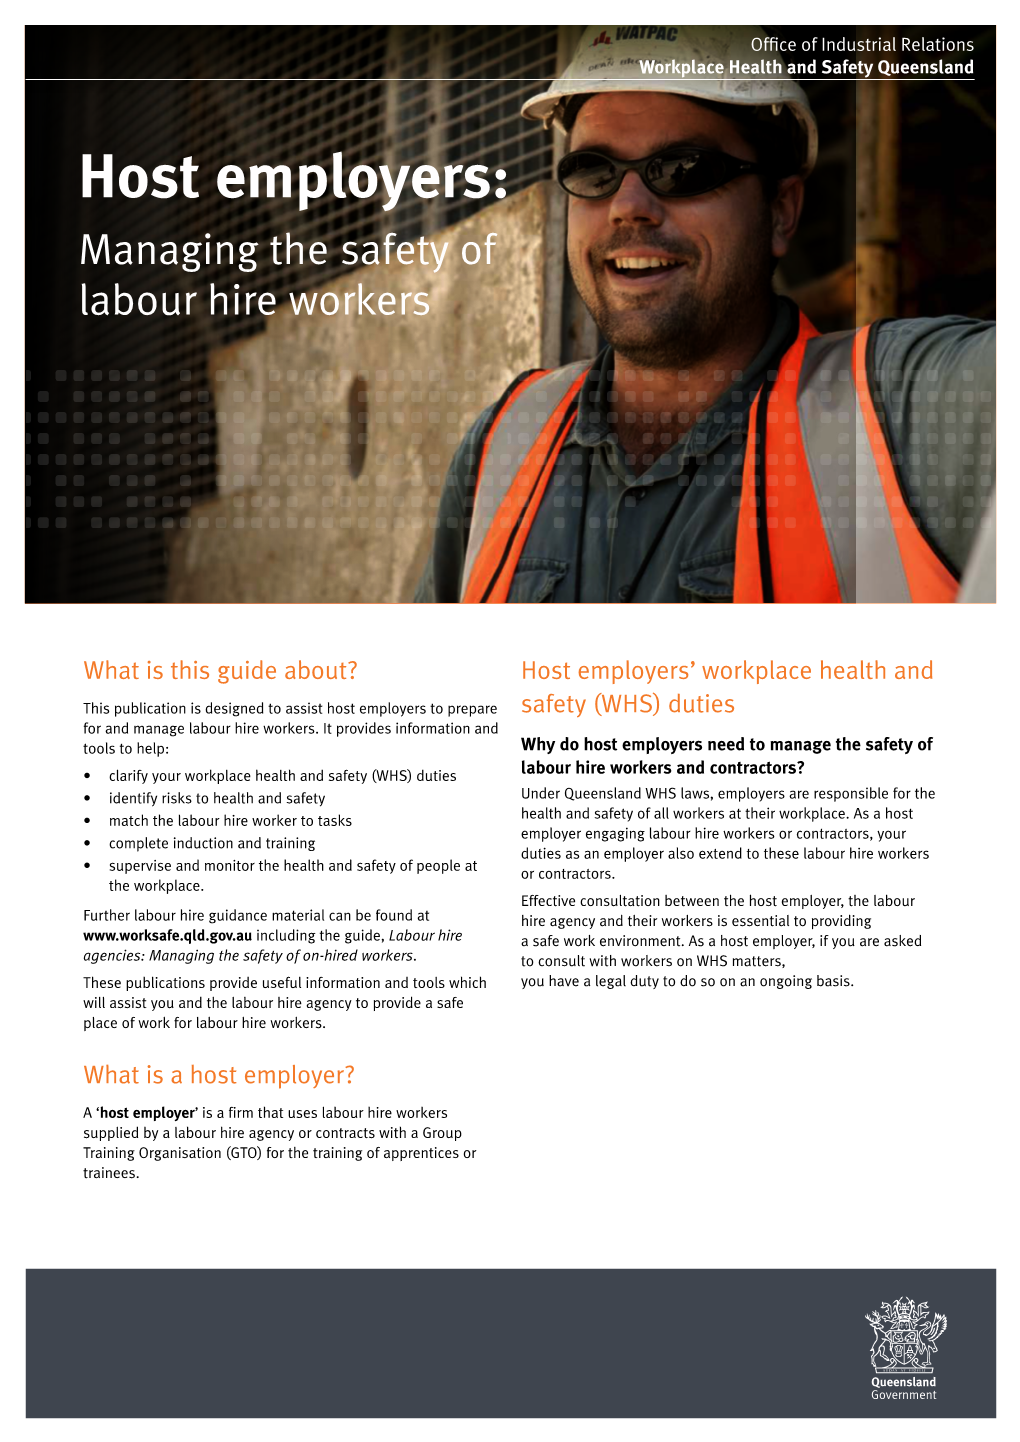 Host Employers: Managing the Safety of Labour Hire Workers